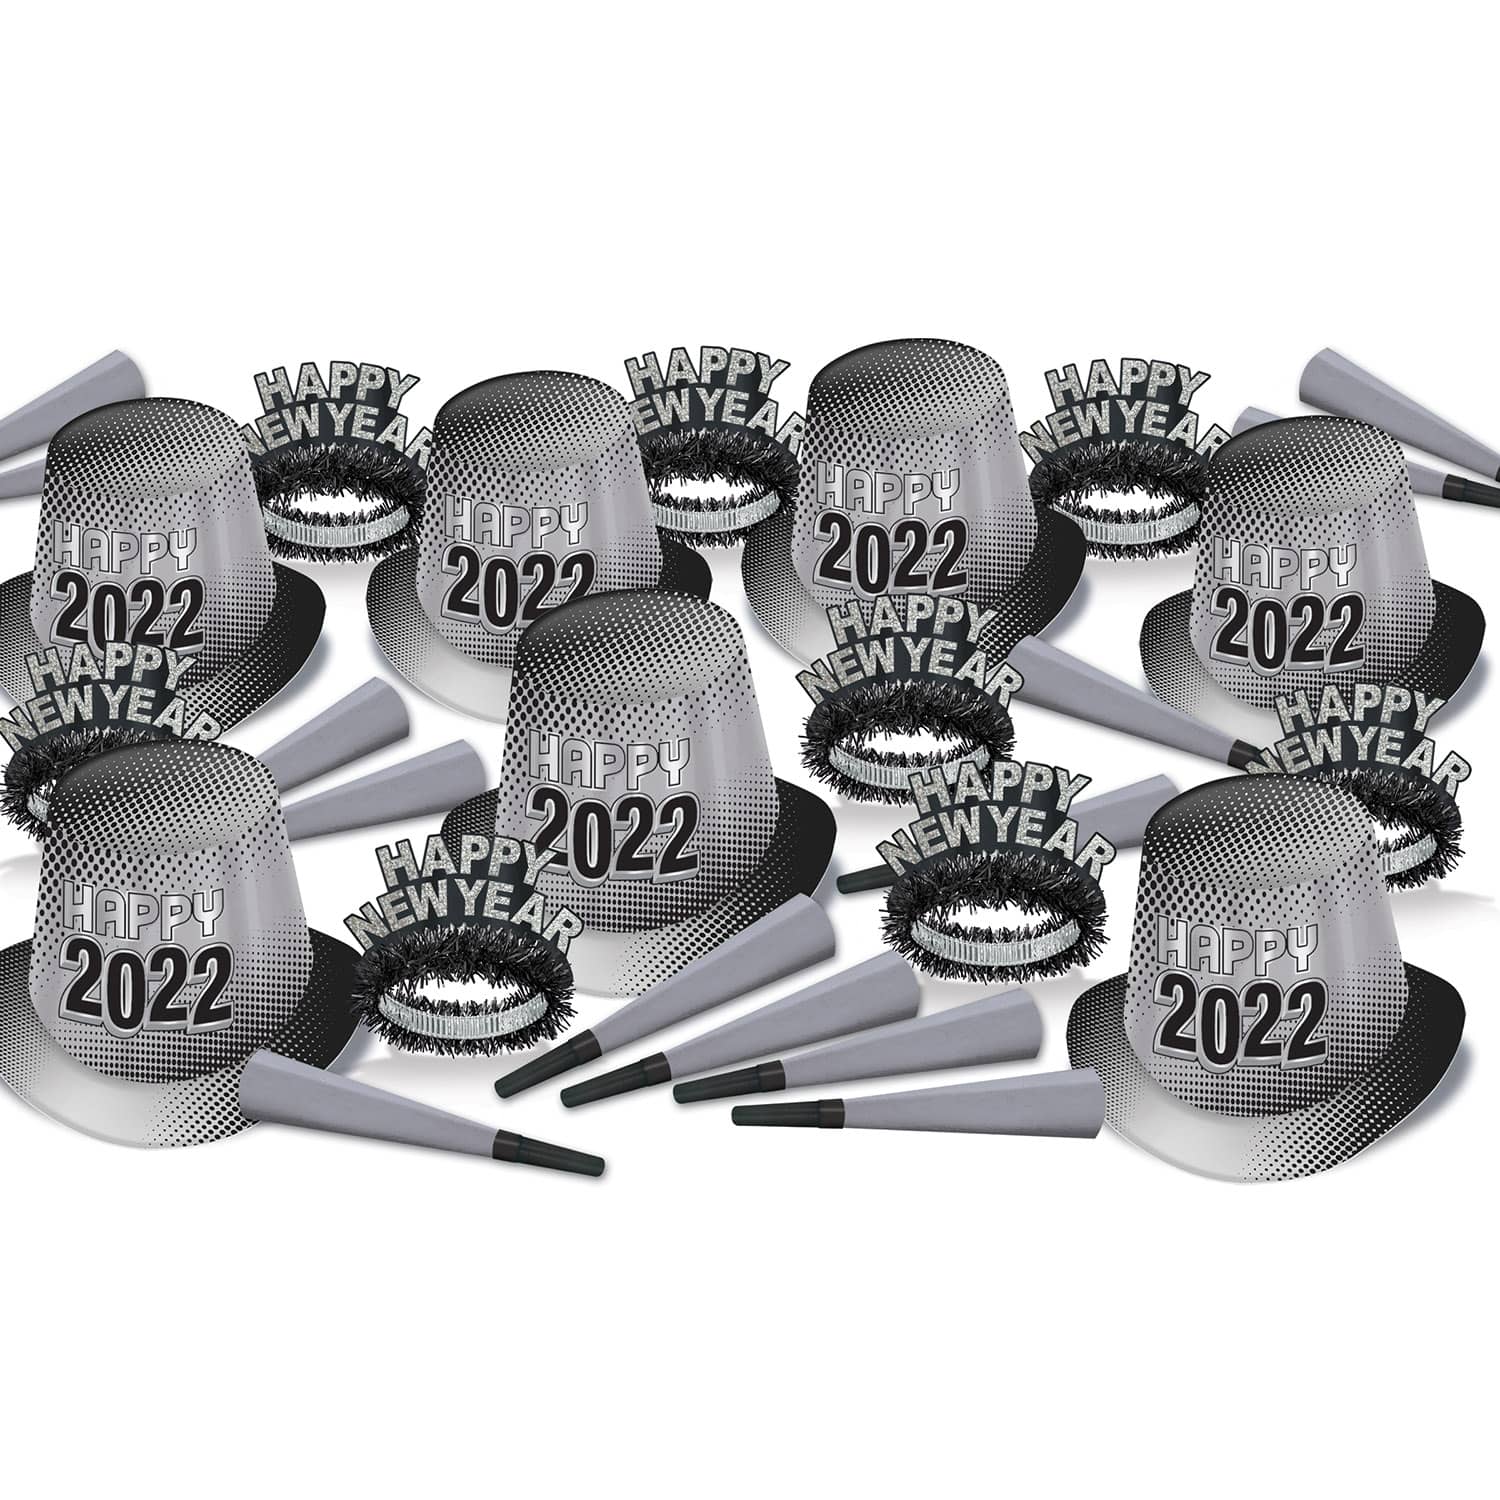 New Year "2022" Silver Assortment for 50  New Year "2022" Silver Assortment for 50 , 2022, bright color, silver, b, new years eve, party kit, hat, tiara, horn, wholesale, inexpensive, bulk, party favor